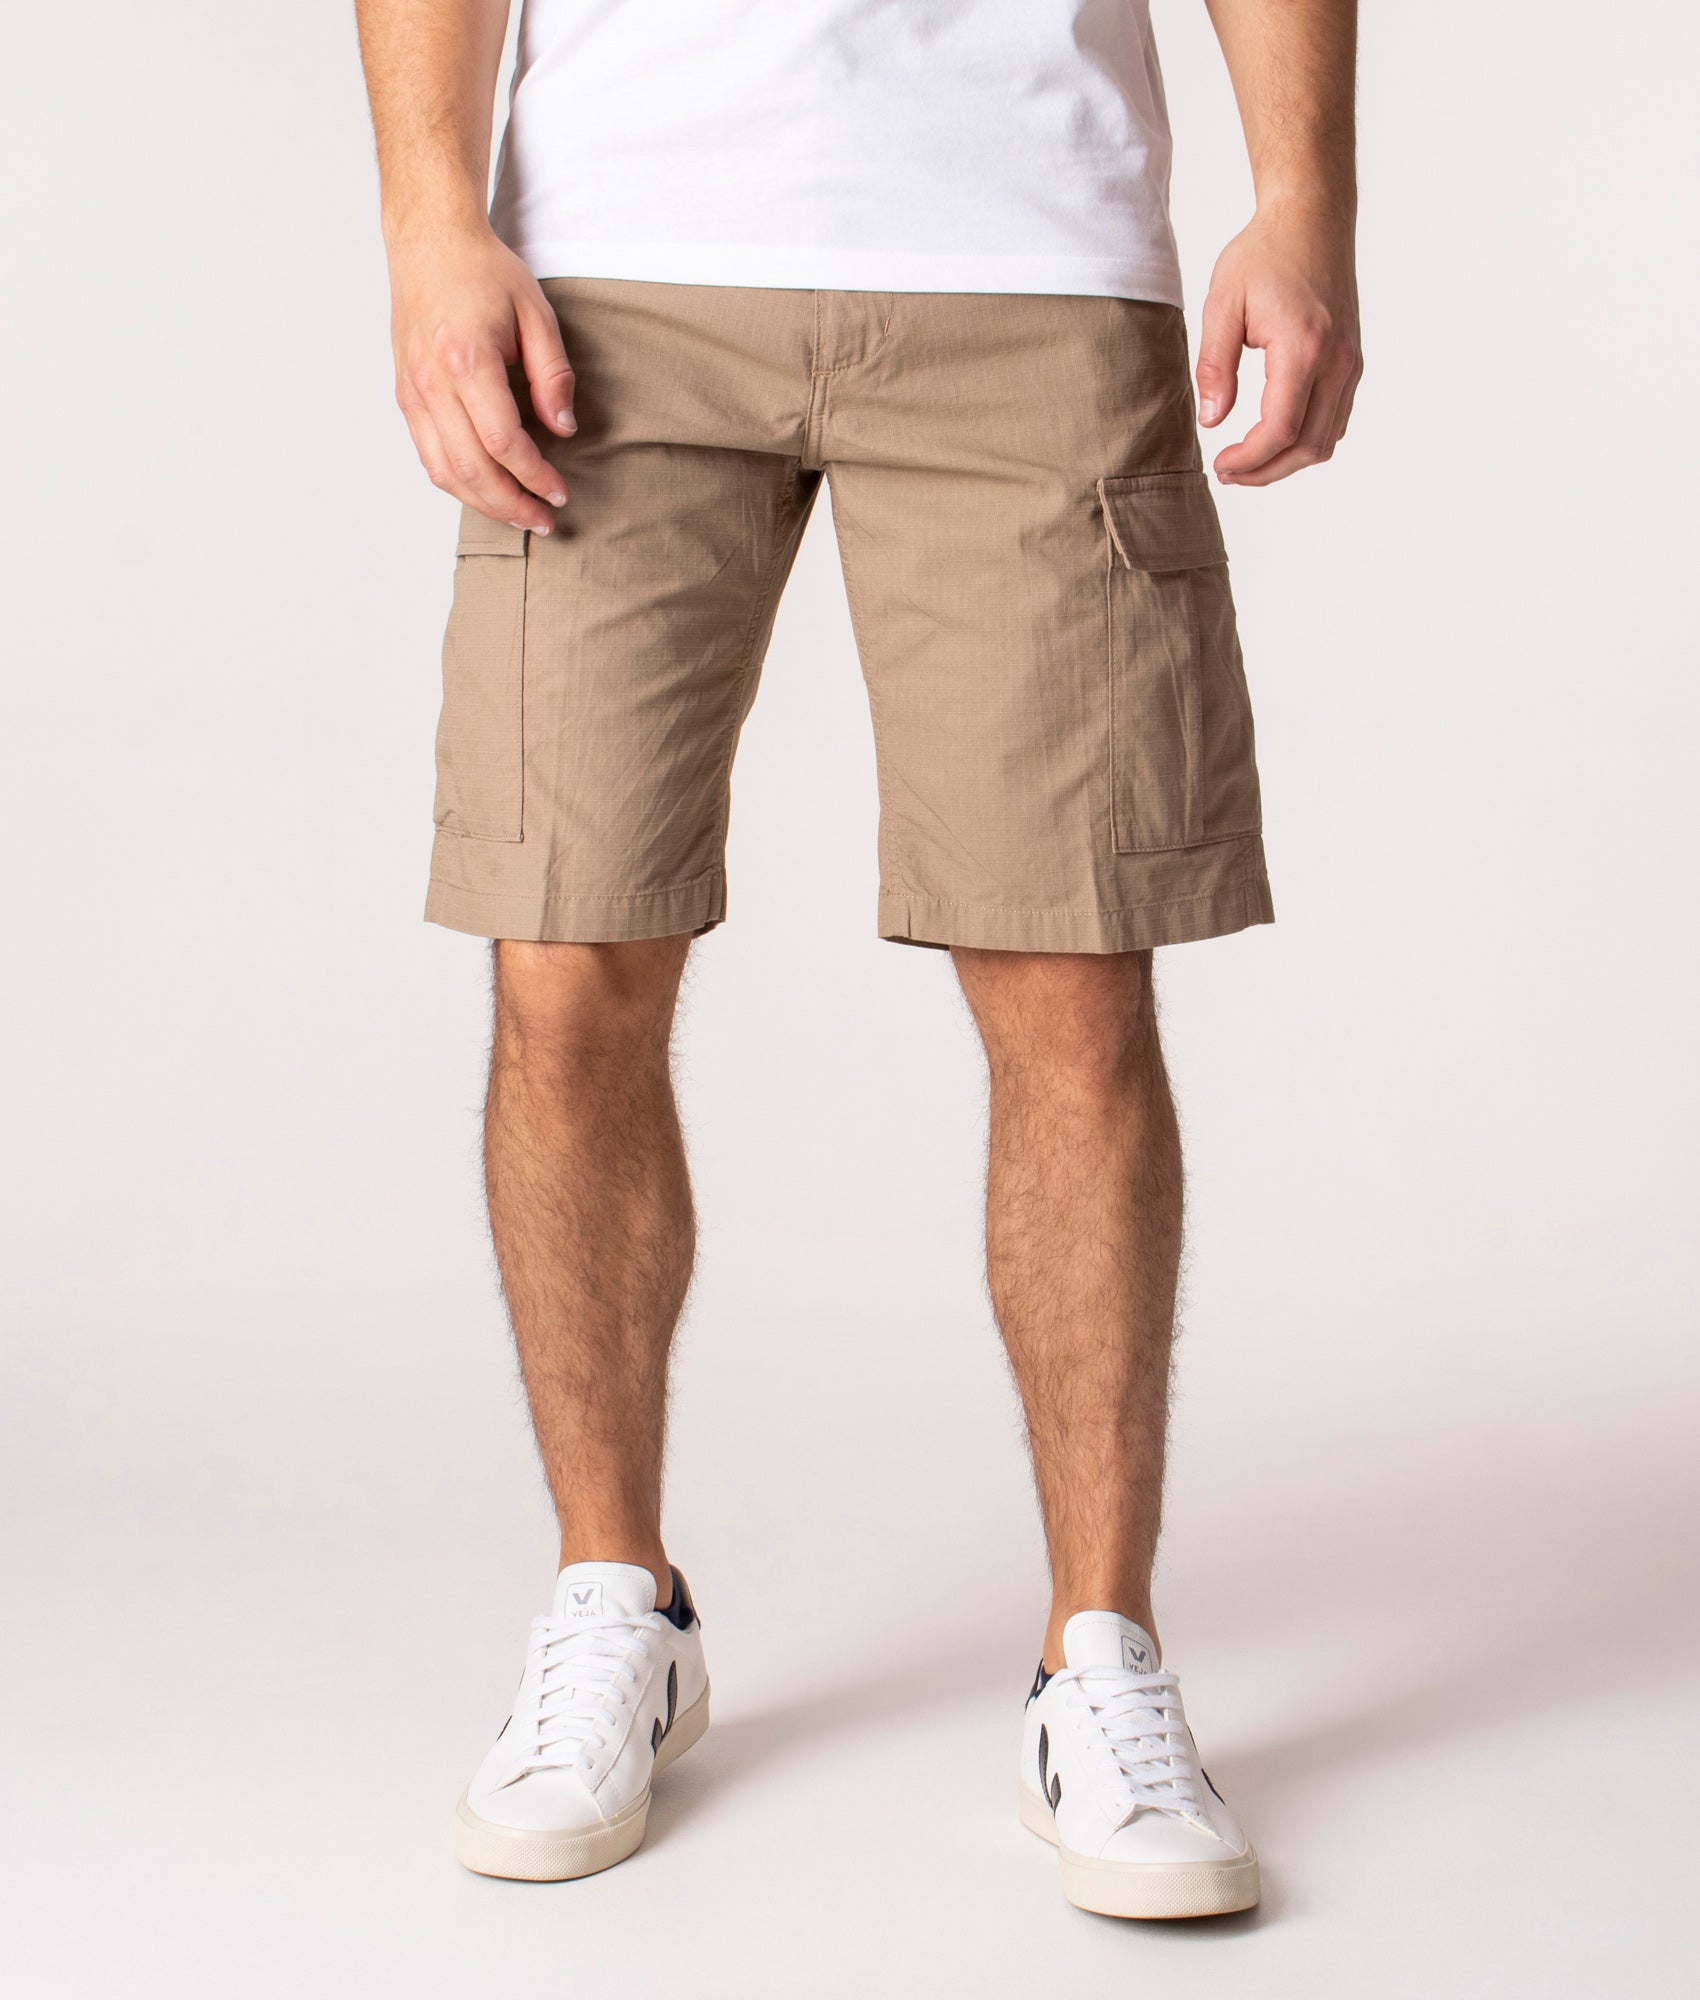 Carhartt WIP Mens Slim Fit Aviation Cargo Shorts - Colour: 8Y0200 Leather Rinsed - Size: 36W